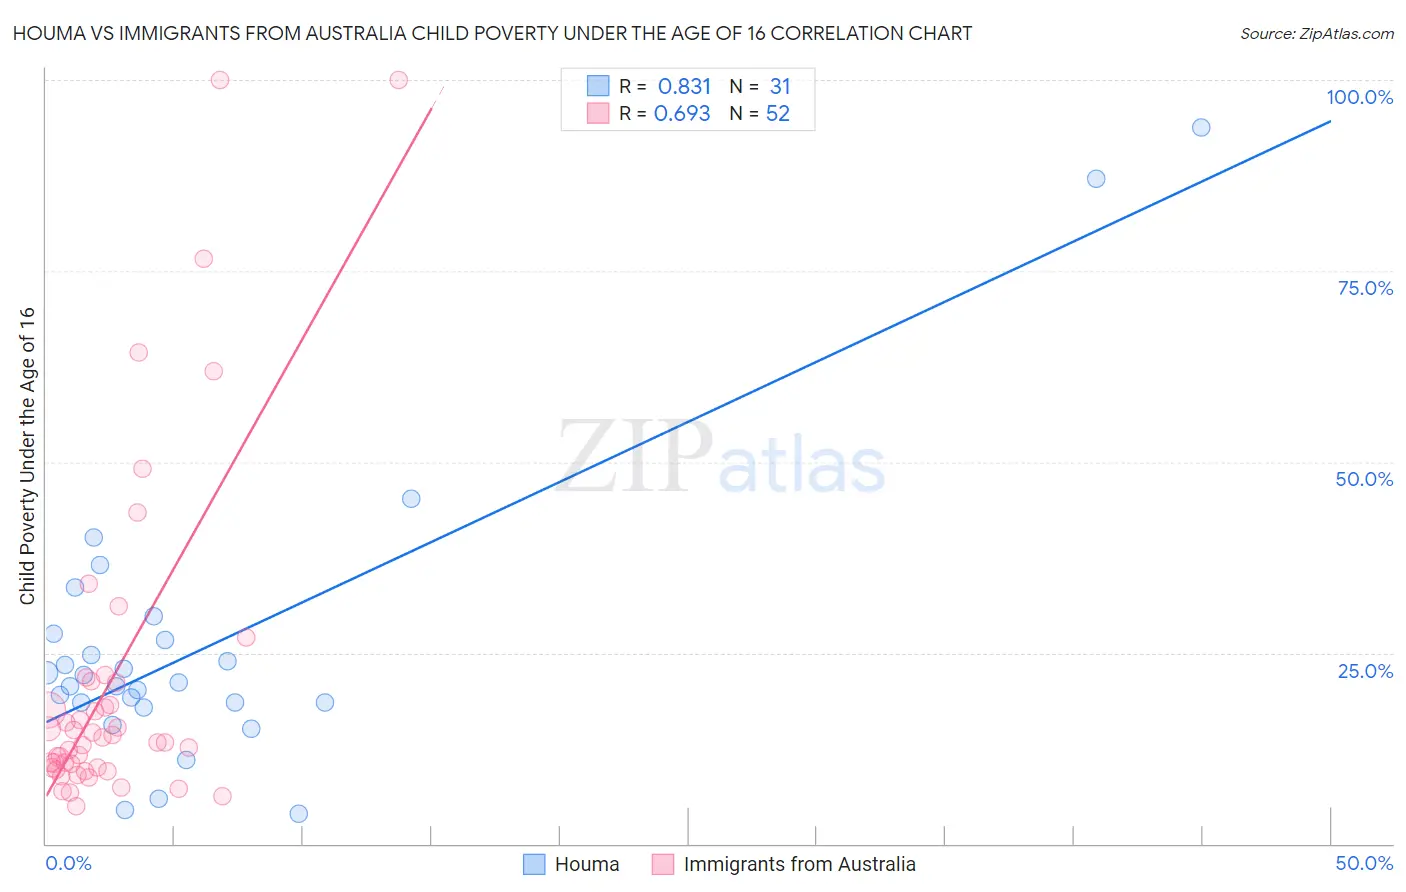 Houma vs Immigrants from Australia Child Poverty Under the Age of 16